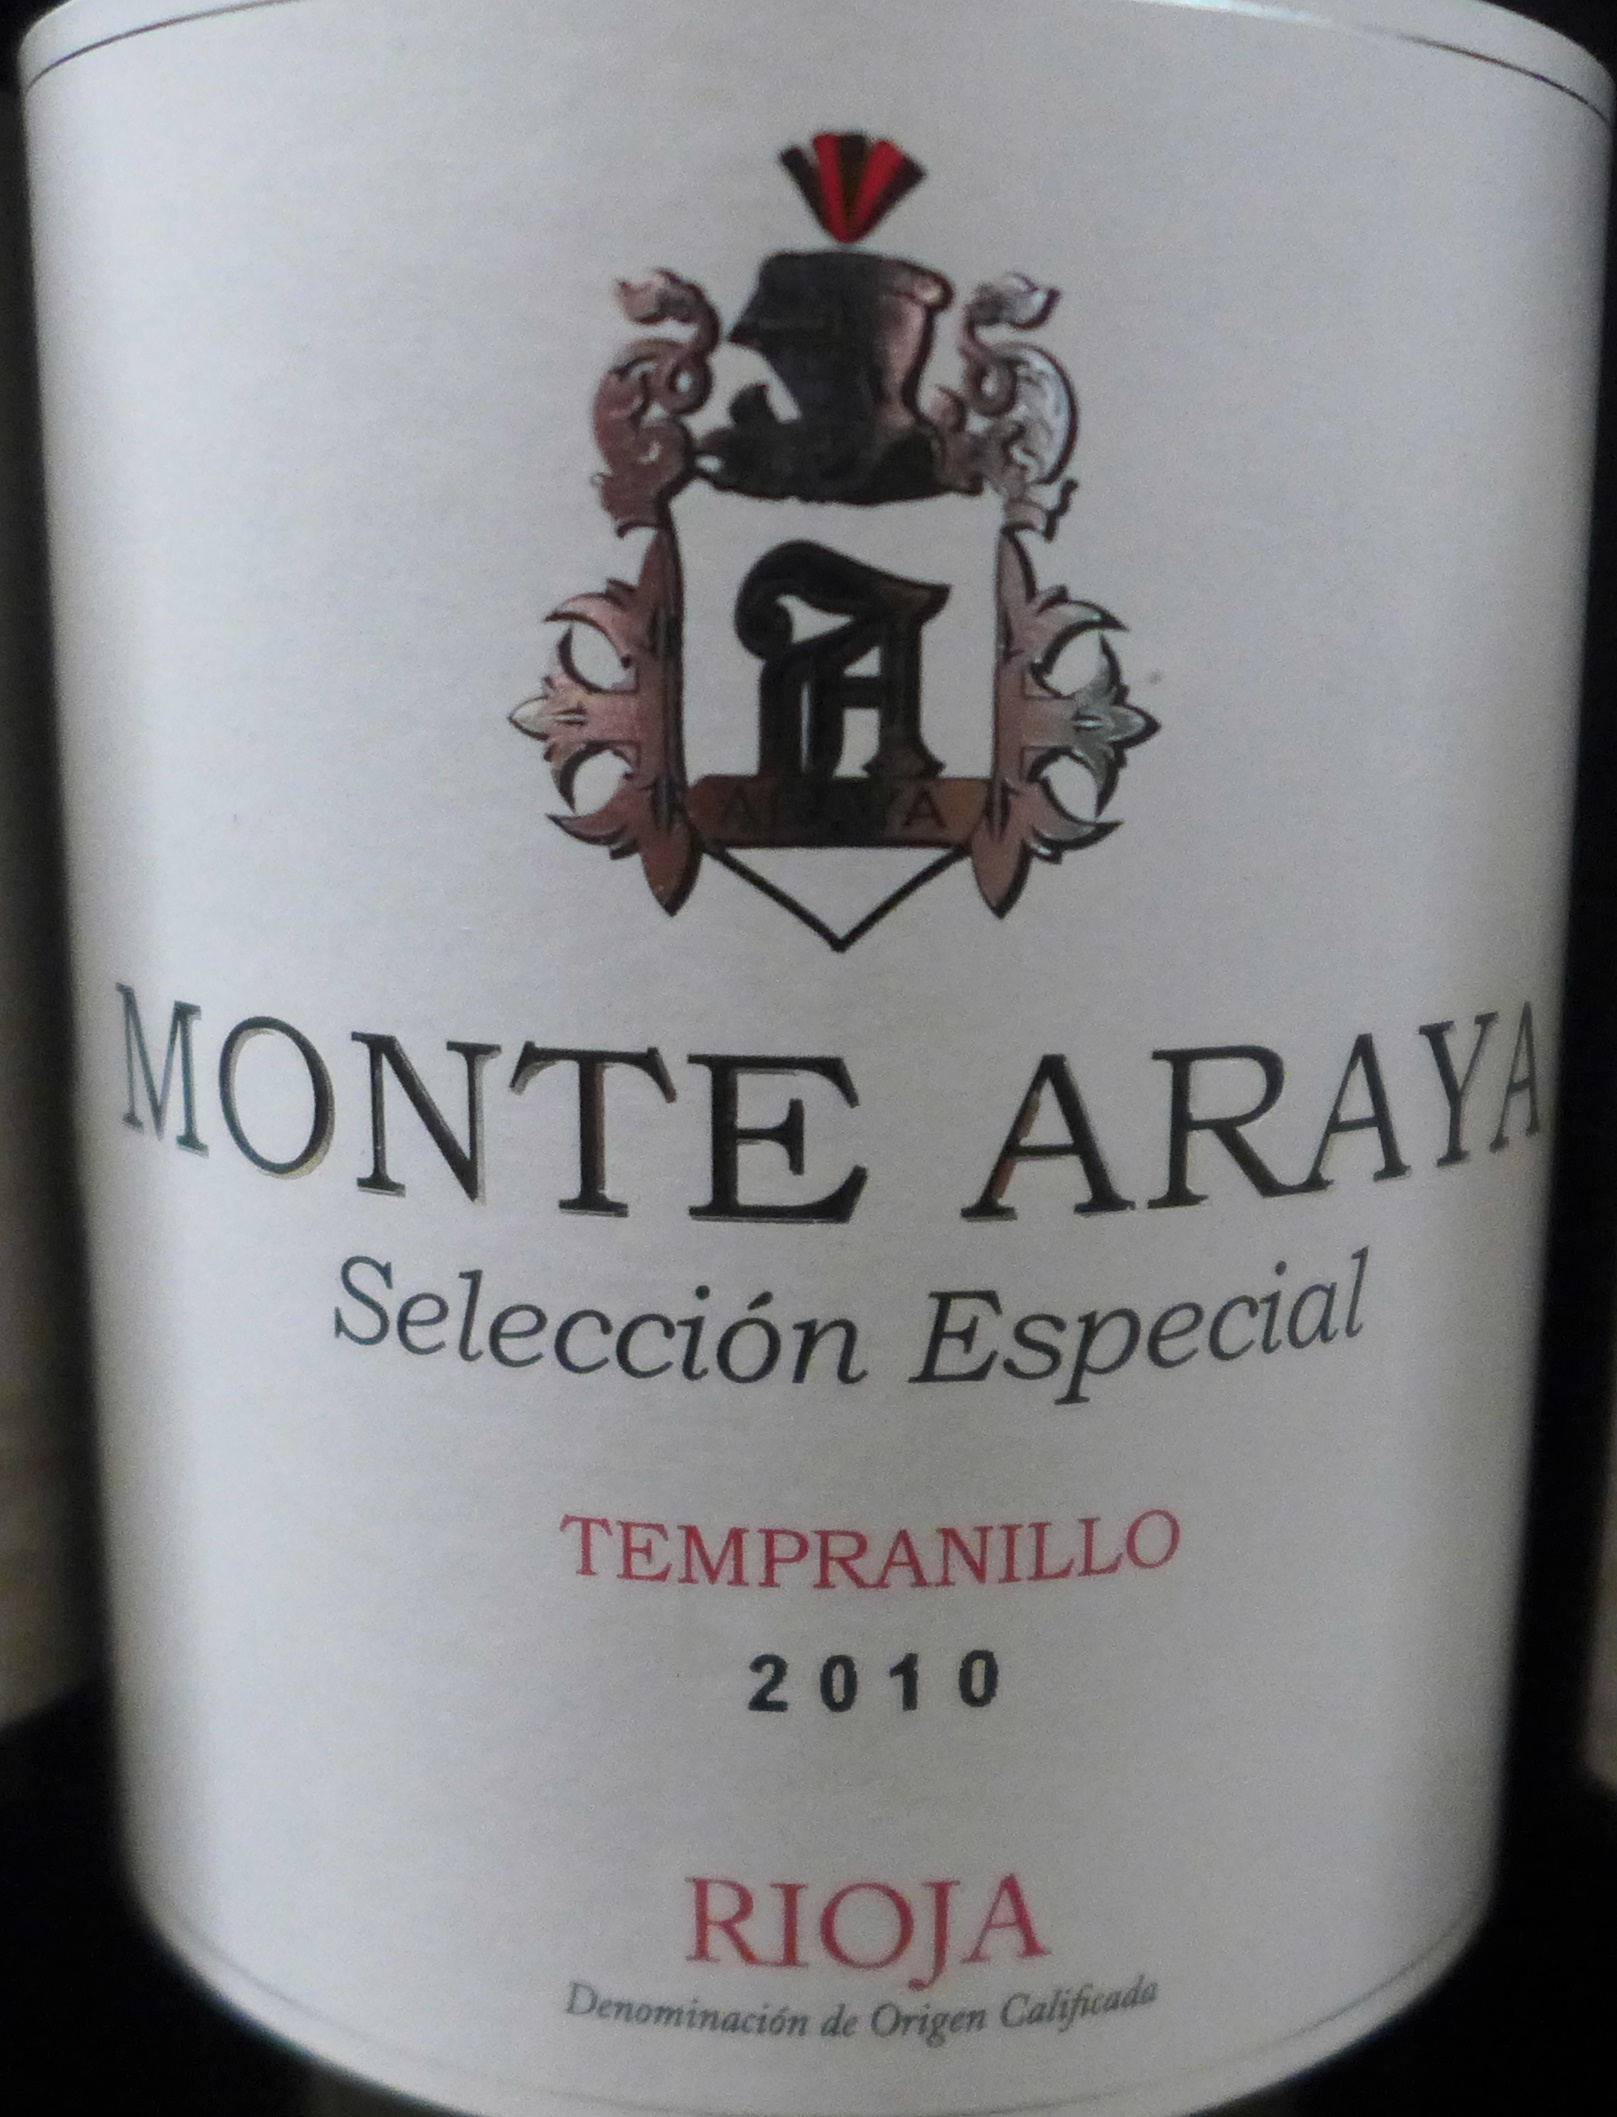 Five bottles of Rioja, two Monte Araya Selection Especial, 2010 and three Arjona 2010 - Image 2 of 4